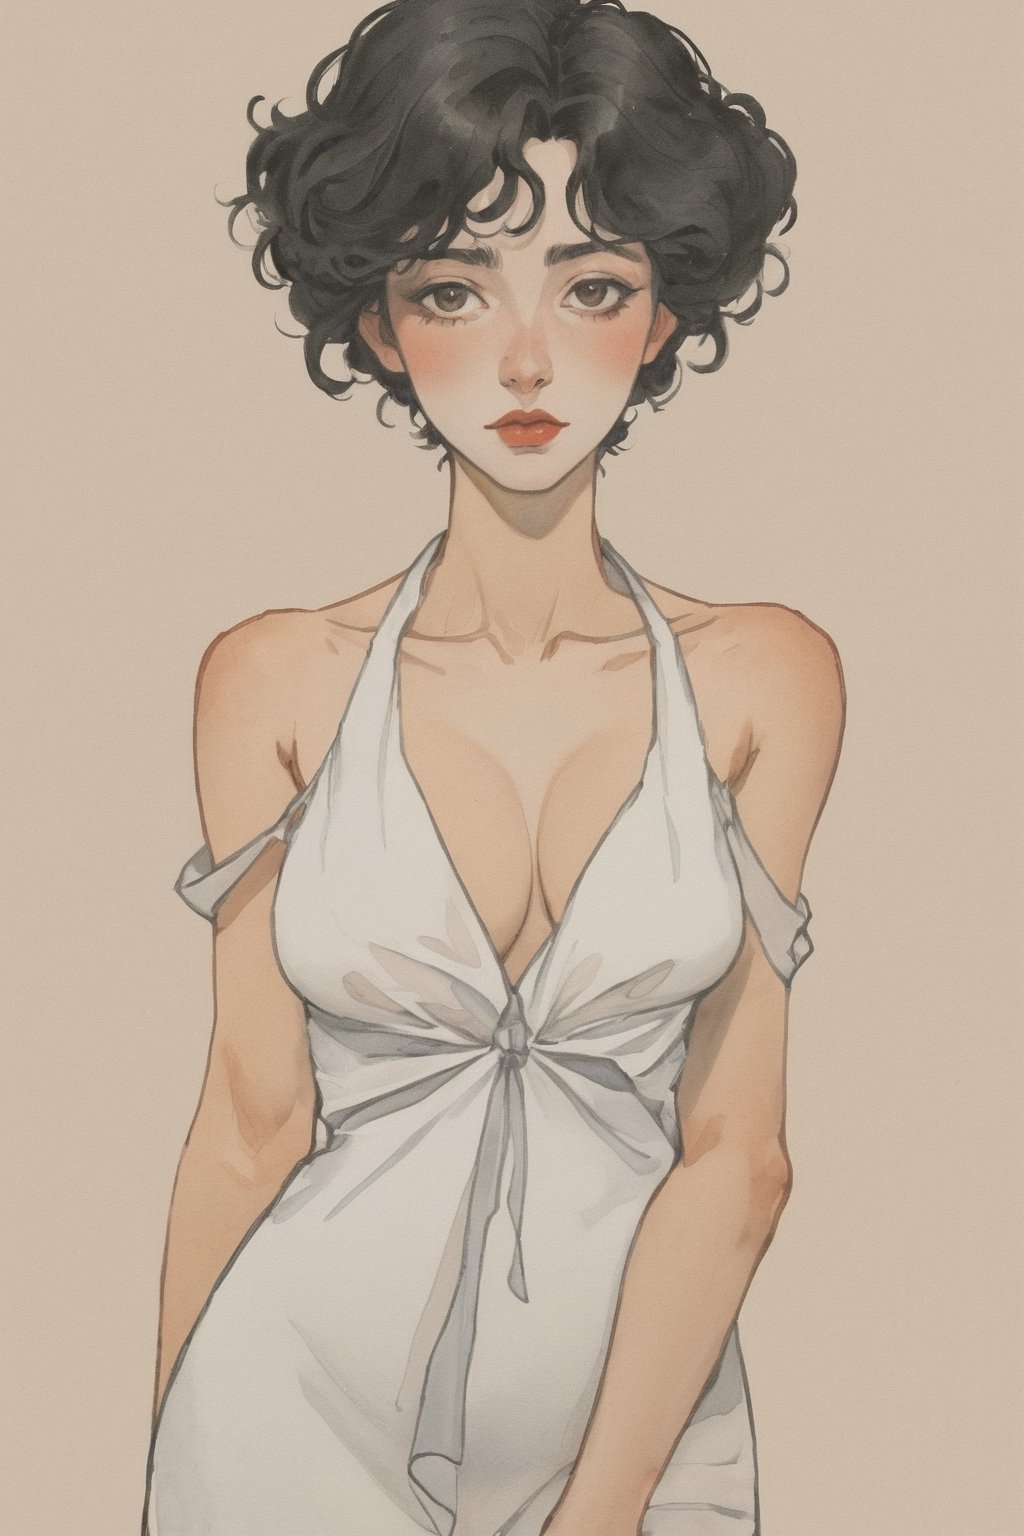 (Best quality, High quality, masterpiece, Artistic, Artistic painting, Painting Naturally, Modernism art, Watercolor, watercolor pencil painting, ligne_claire, Illustration), bare shoulder, 1 girl, deep v neck dress, (Painted by 3 person that is Egon Schiele and Pablo Picasso and John Barkey), stylized art, Red Rose, Black hair, 